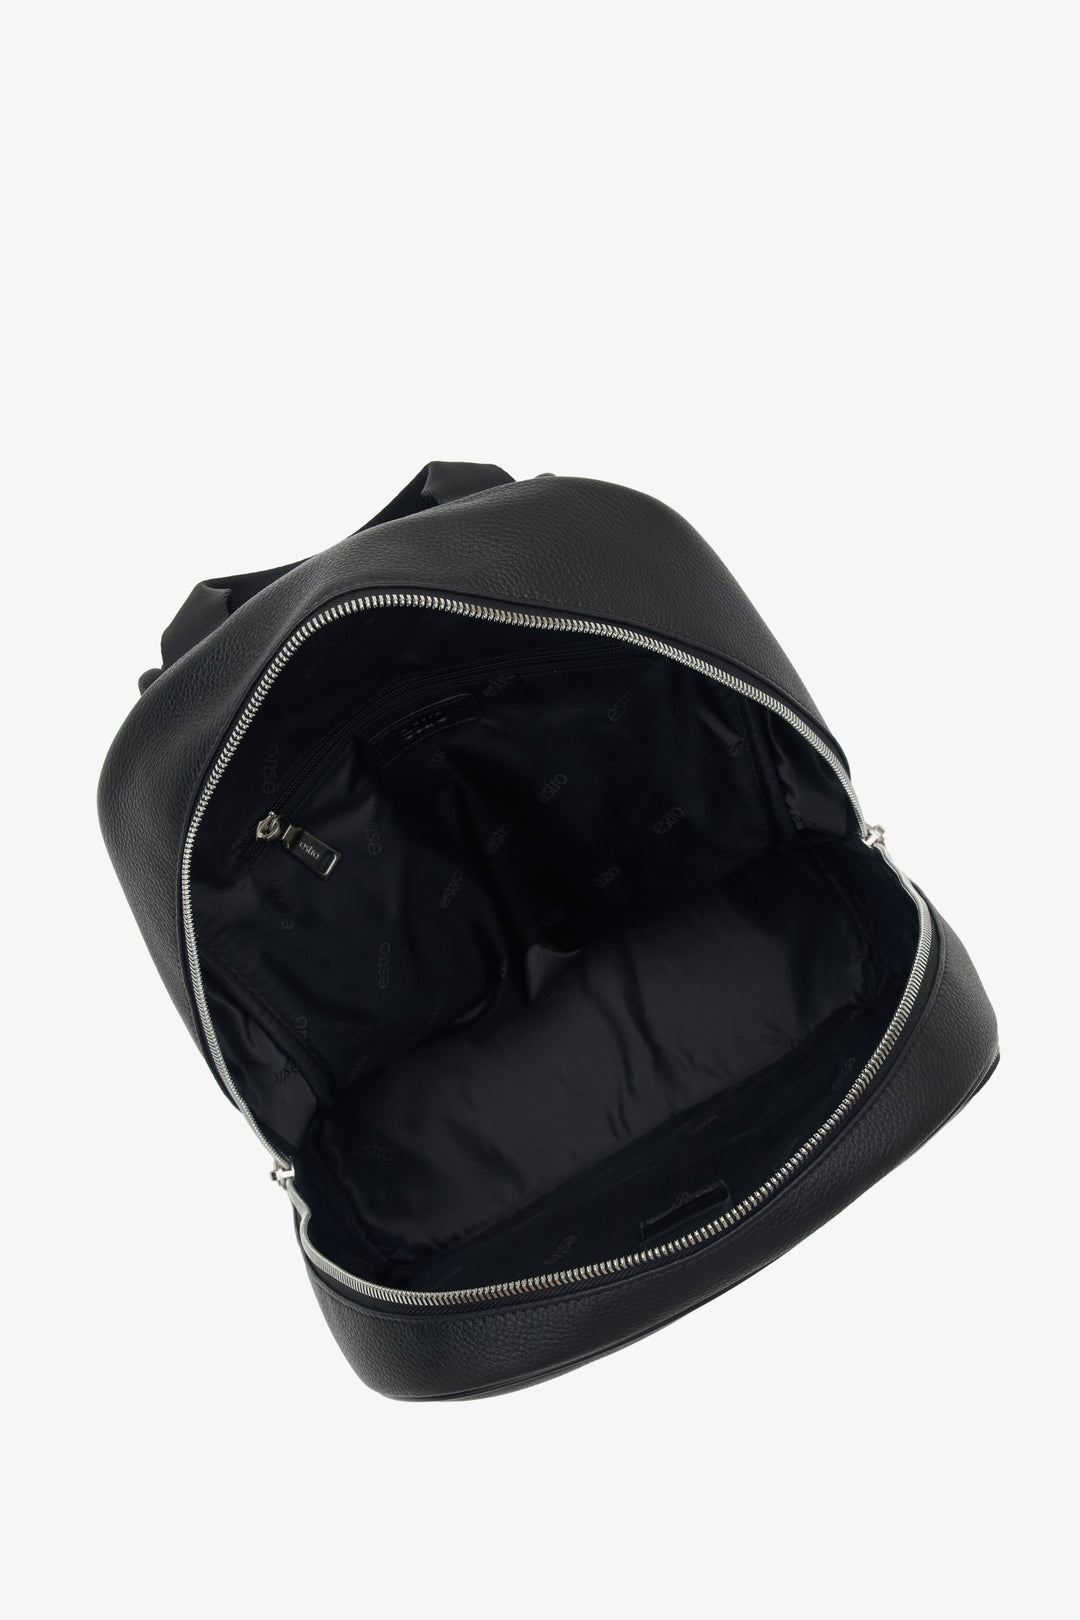 Men's black backpack made of genuine leather by Estro - close-up on the interior.